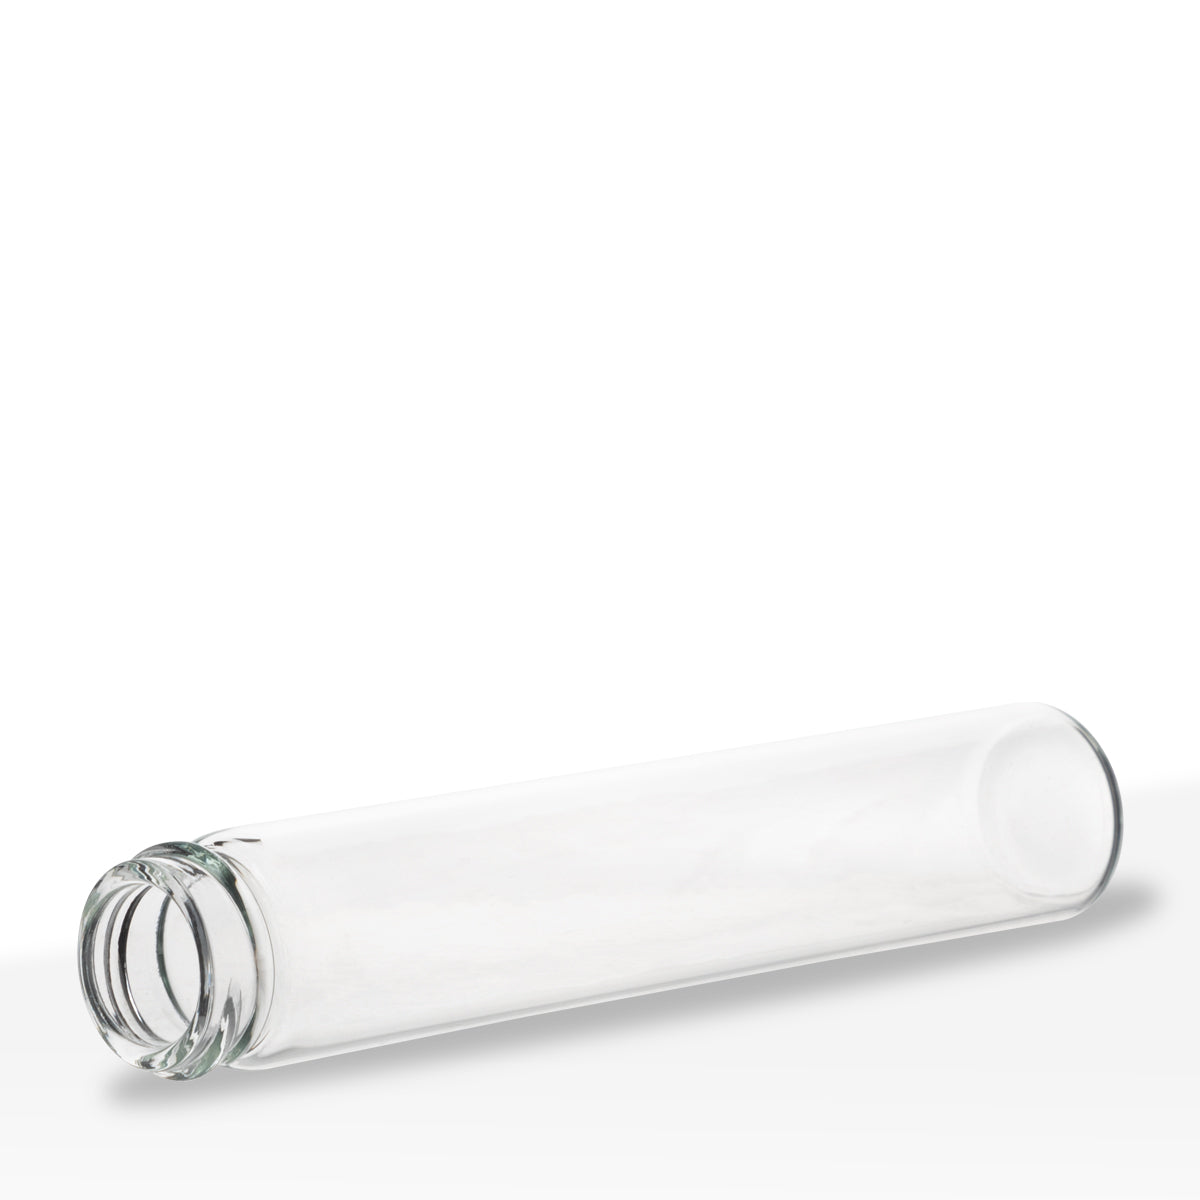 Glass Vial | Clear Glass Pre-Roll Tube | 20mm - 110mm - 240 Count